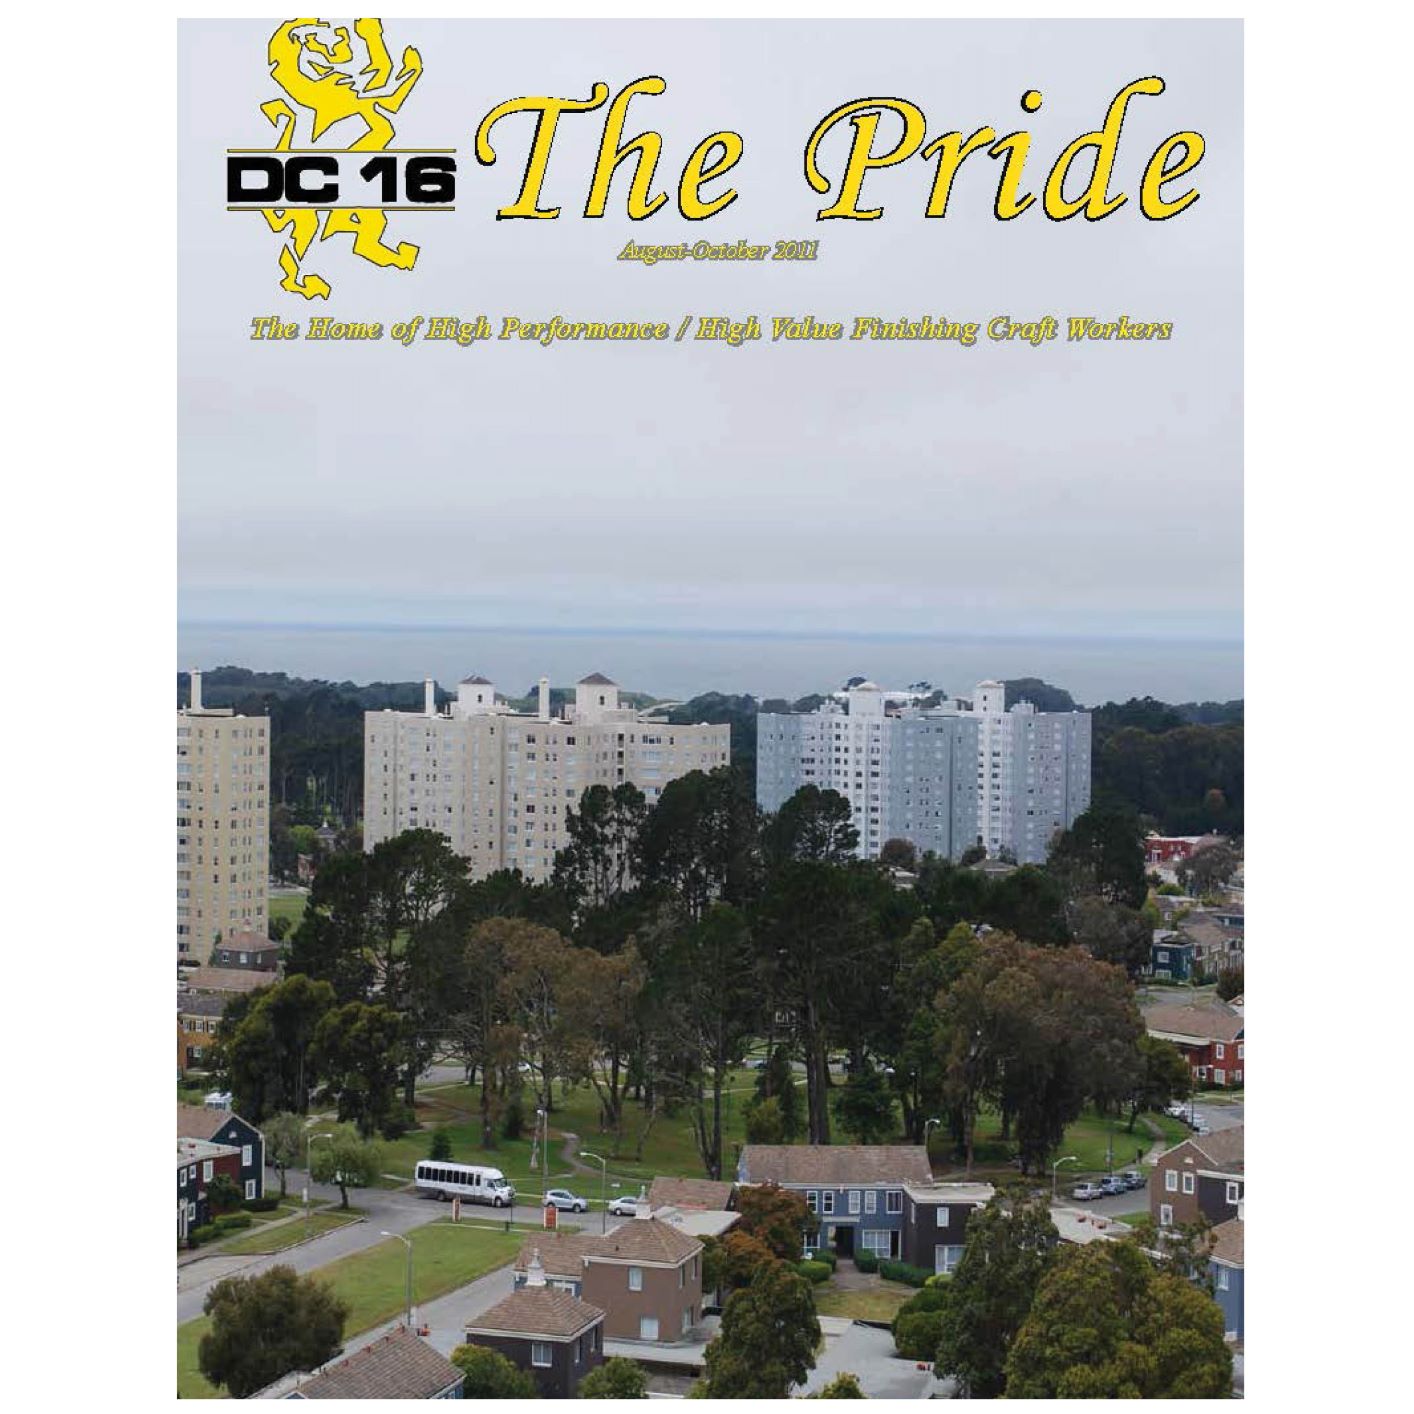 Image from the Gallery: The Pride August – October 2011